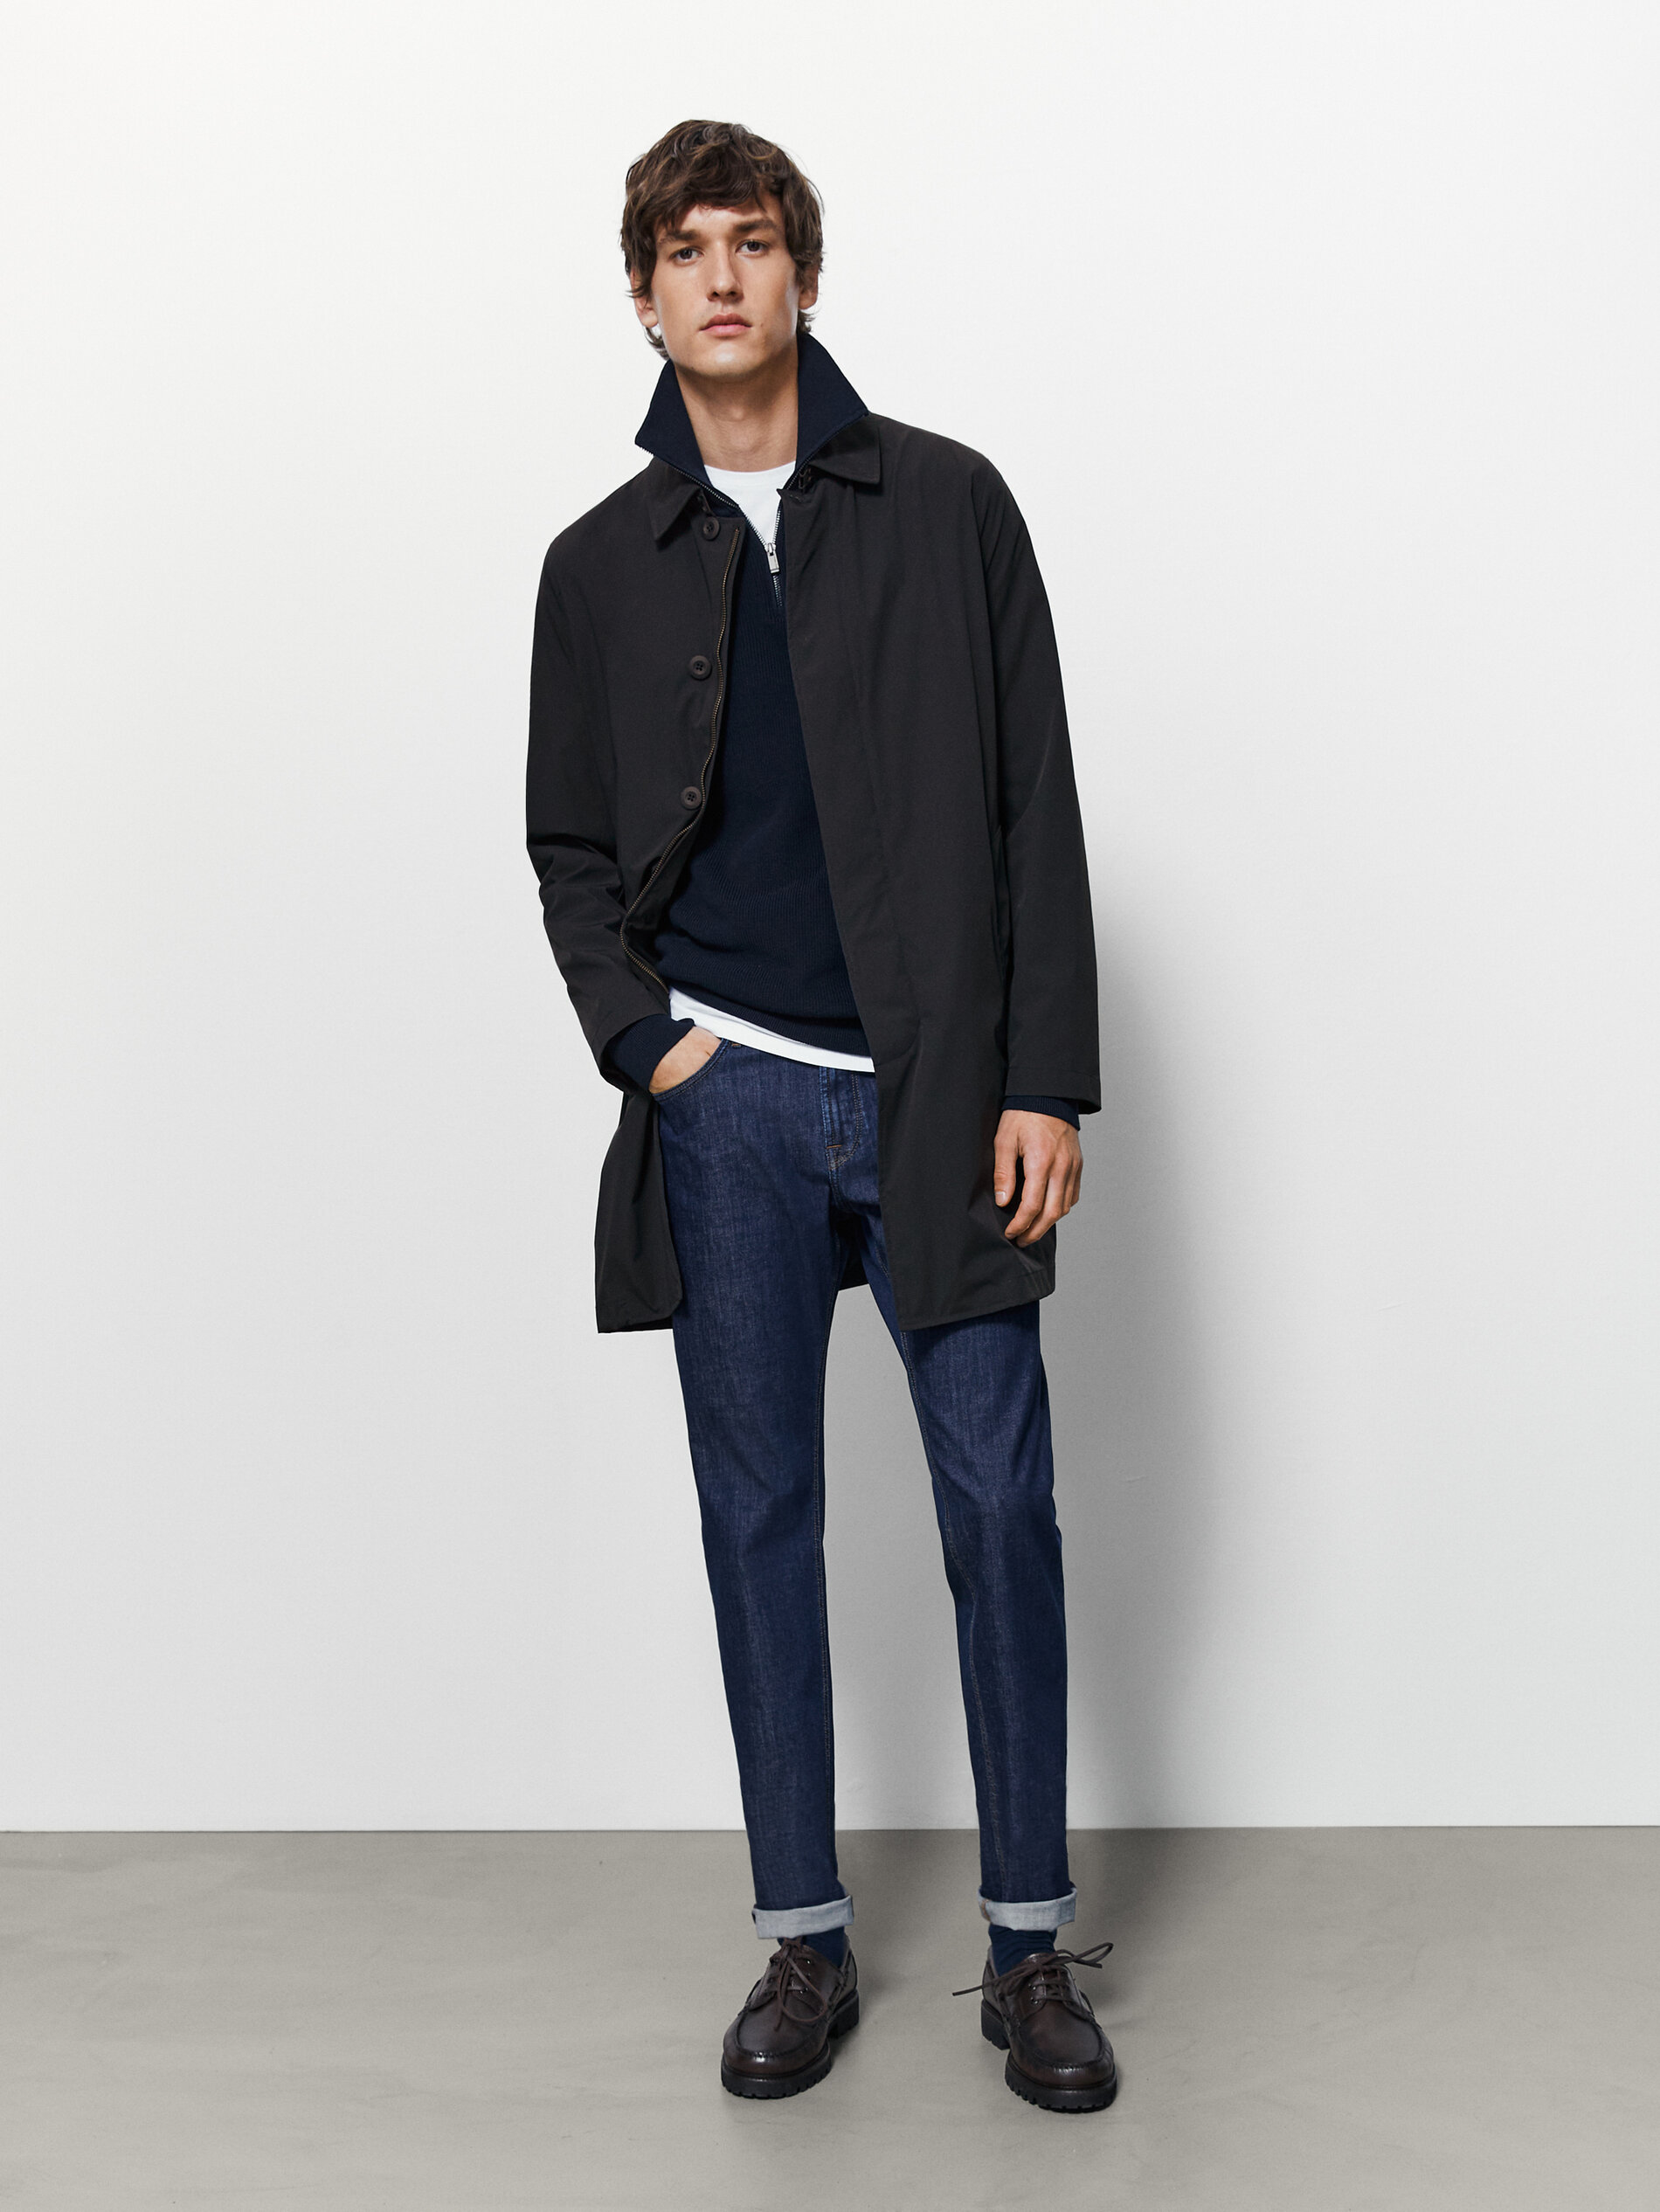 Navy blue technical trench coat